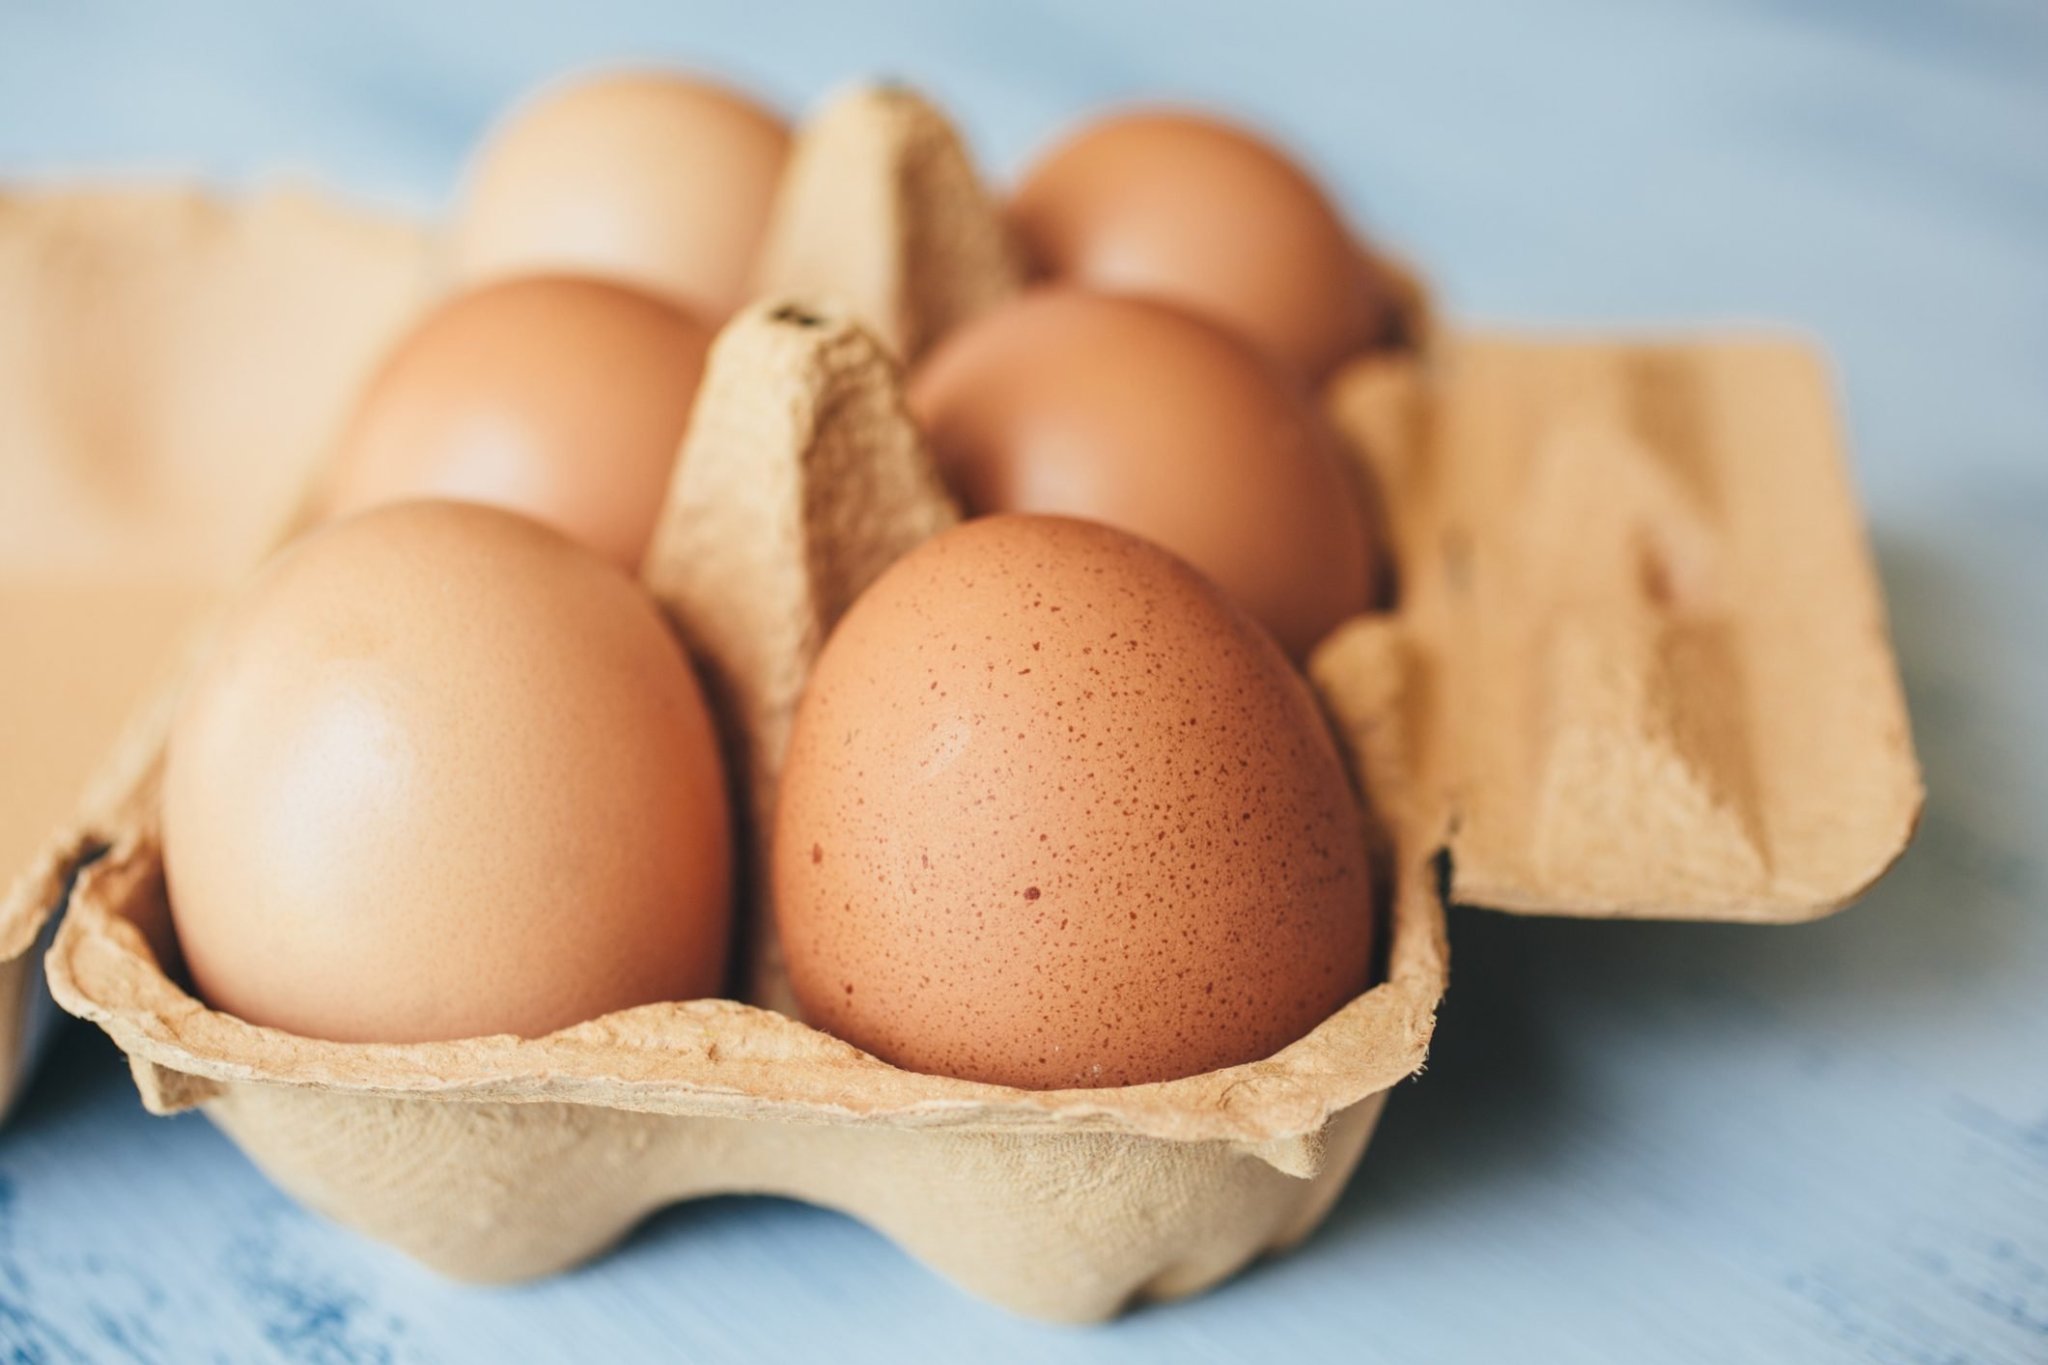 If You See Spots or Bumps on Your Eggs, This Is What It Means